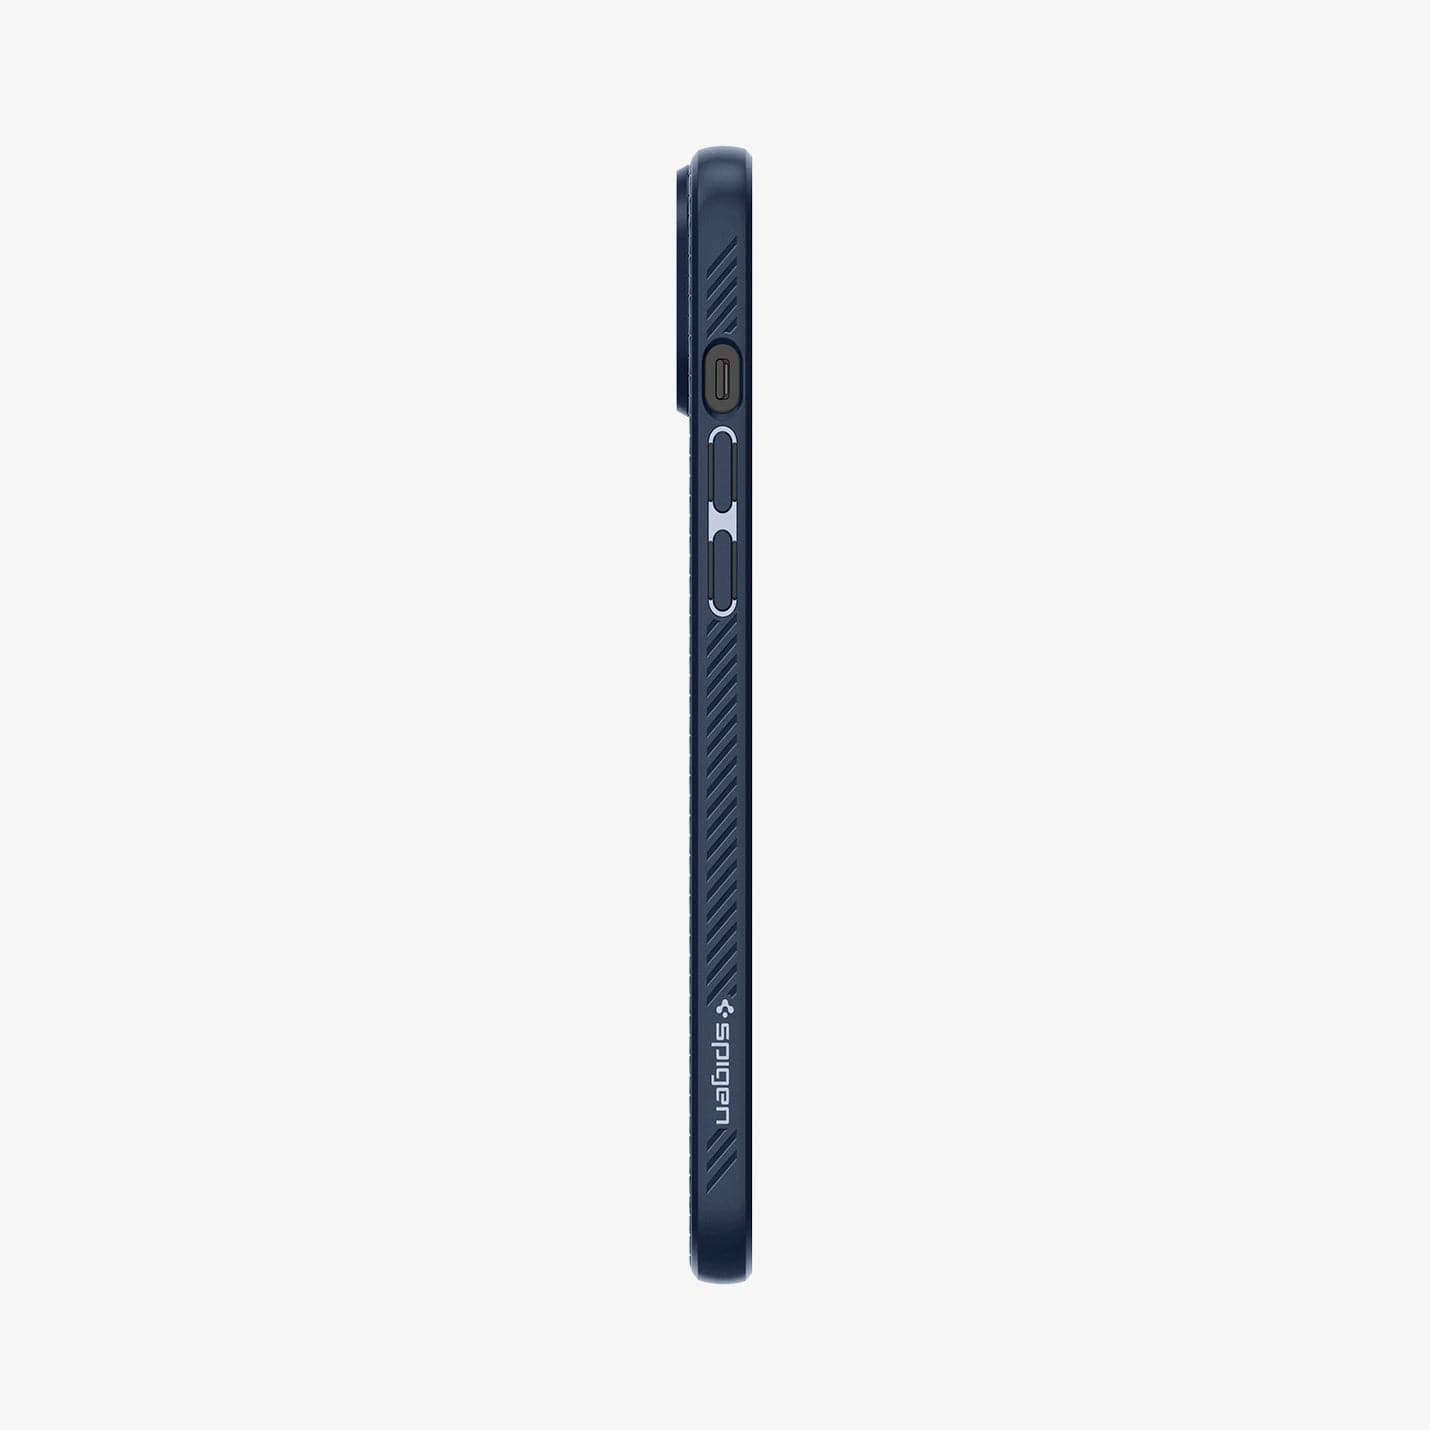 ACS06651 - iPhone 15 Plus Case Liquid Air in navy blue showing the side with volume controls